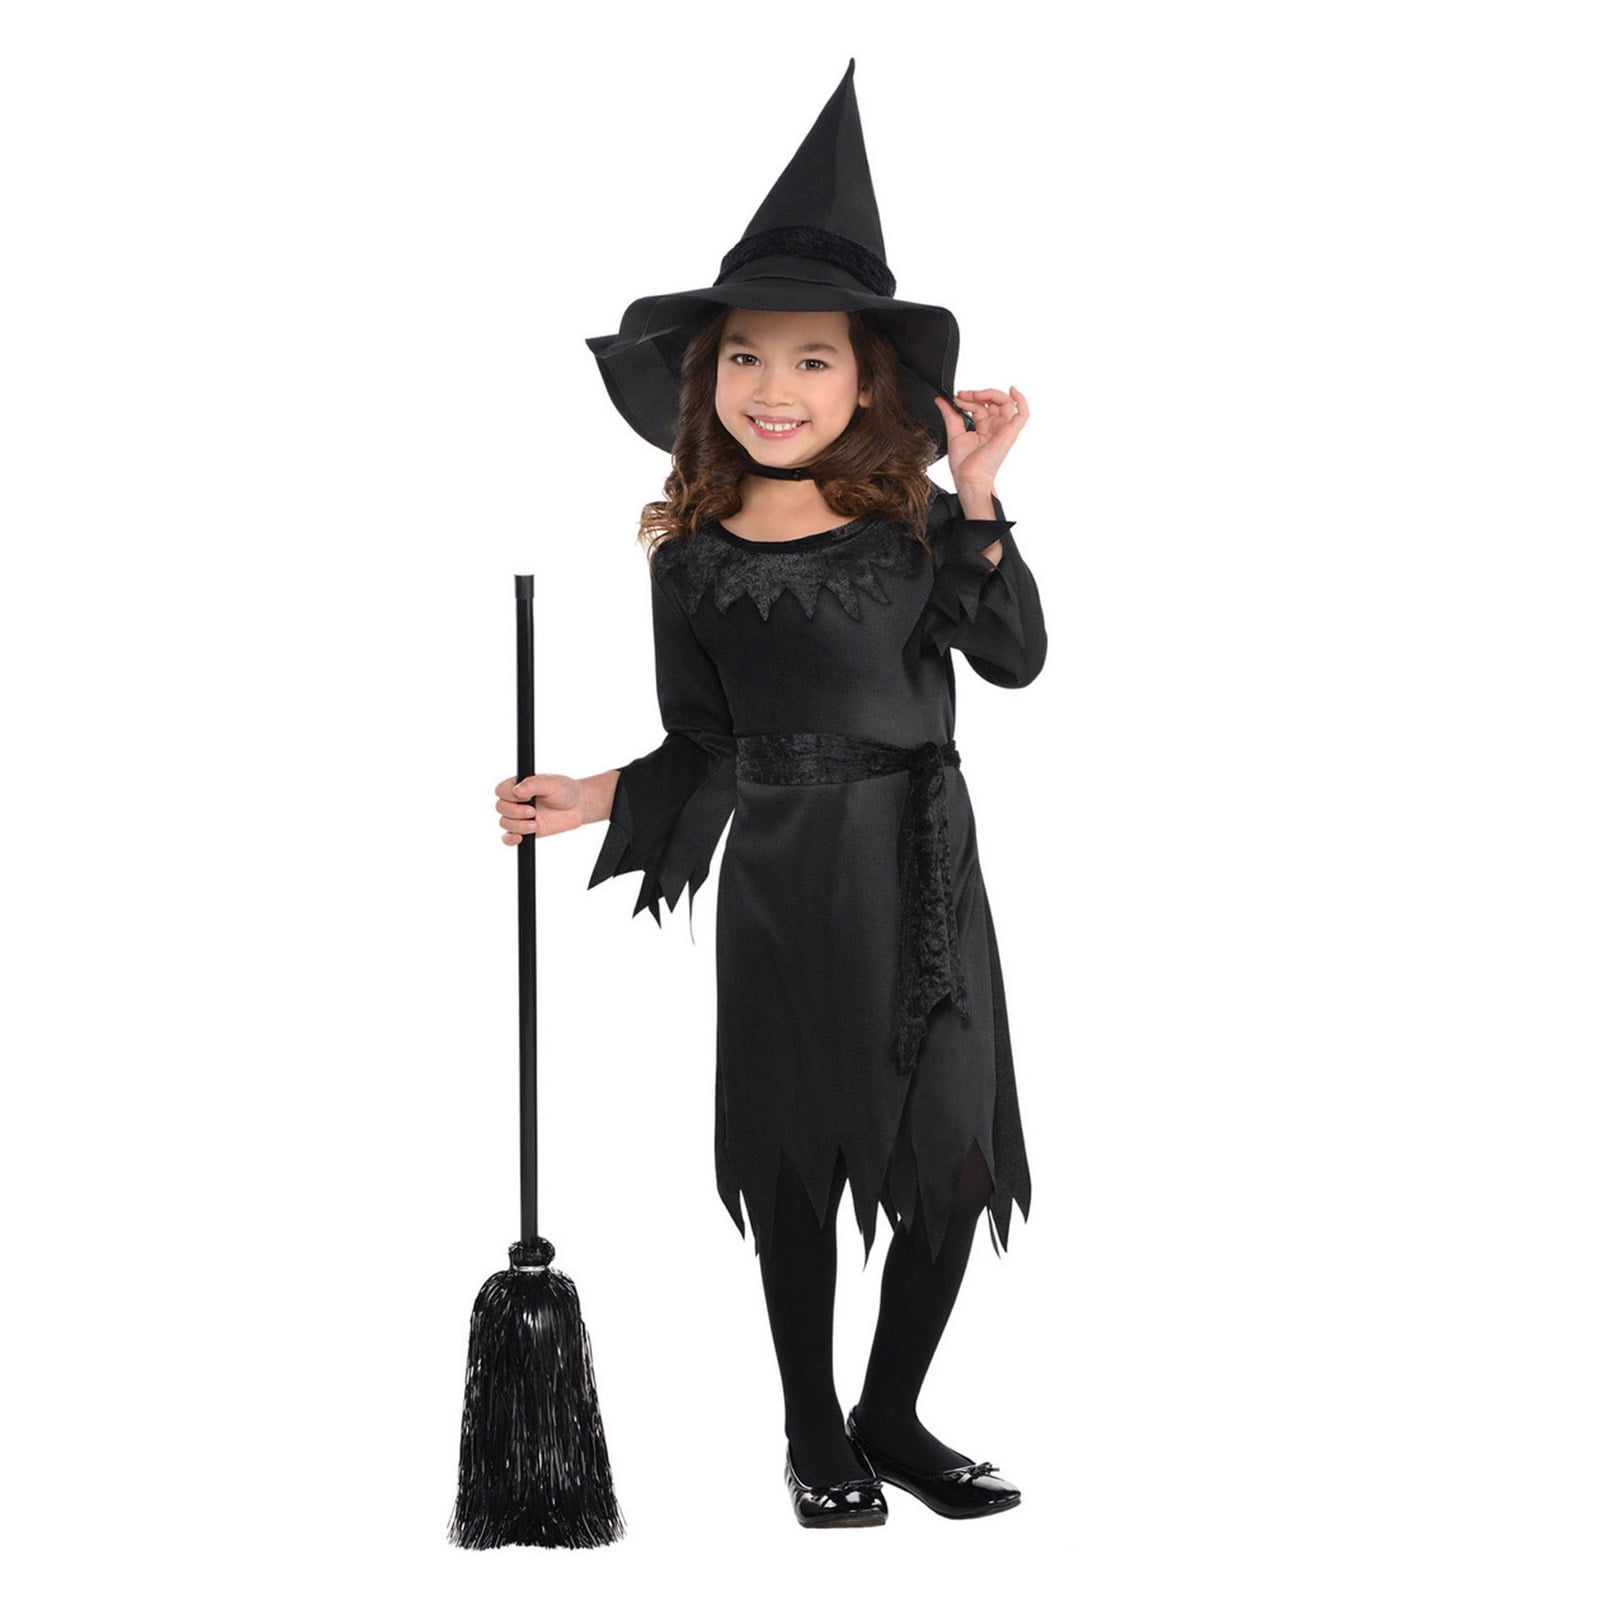 Lil' Witch Toddler Costume - Walmart.com